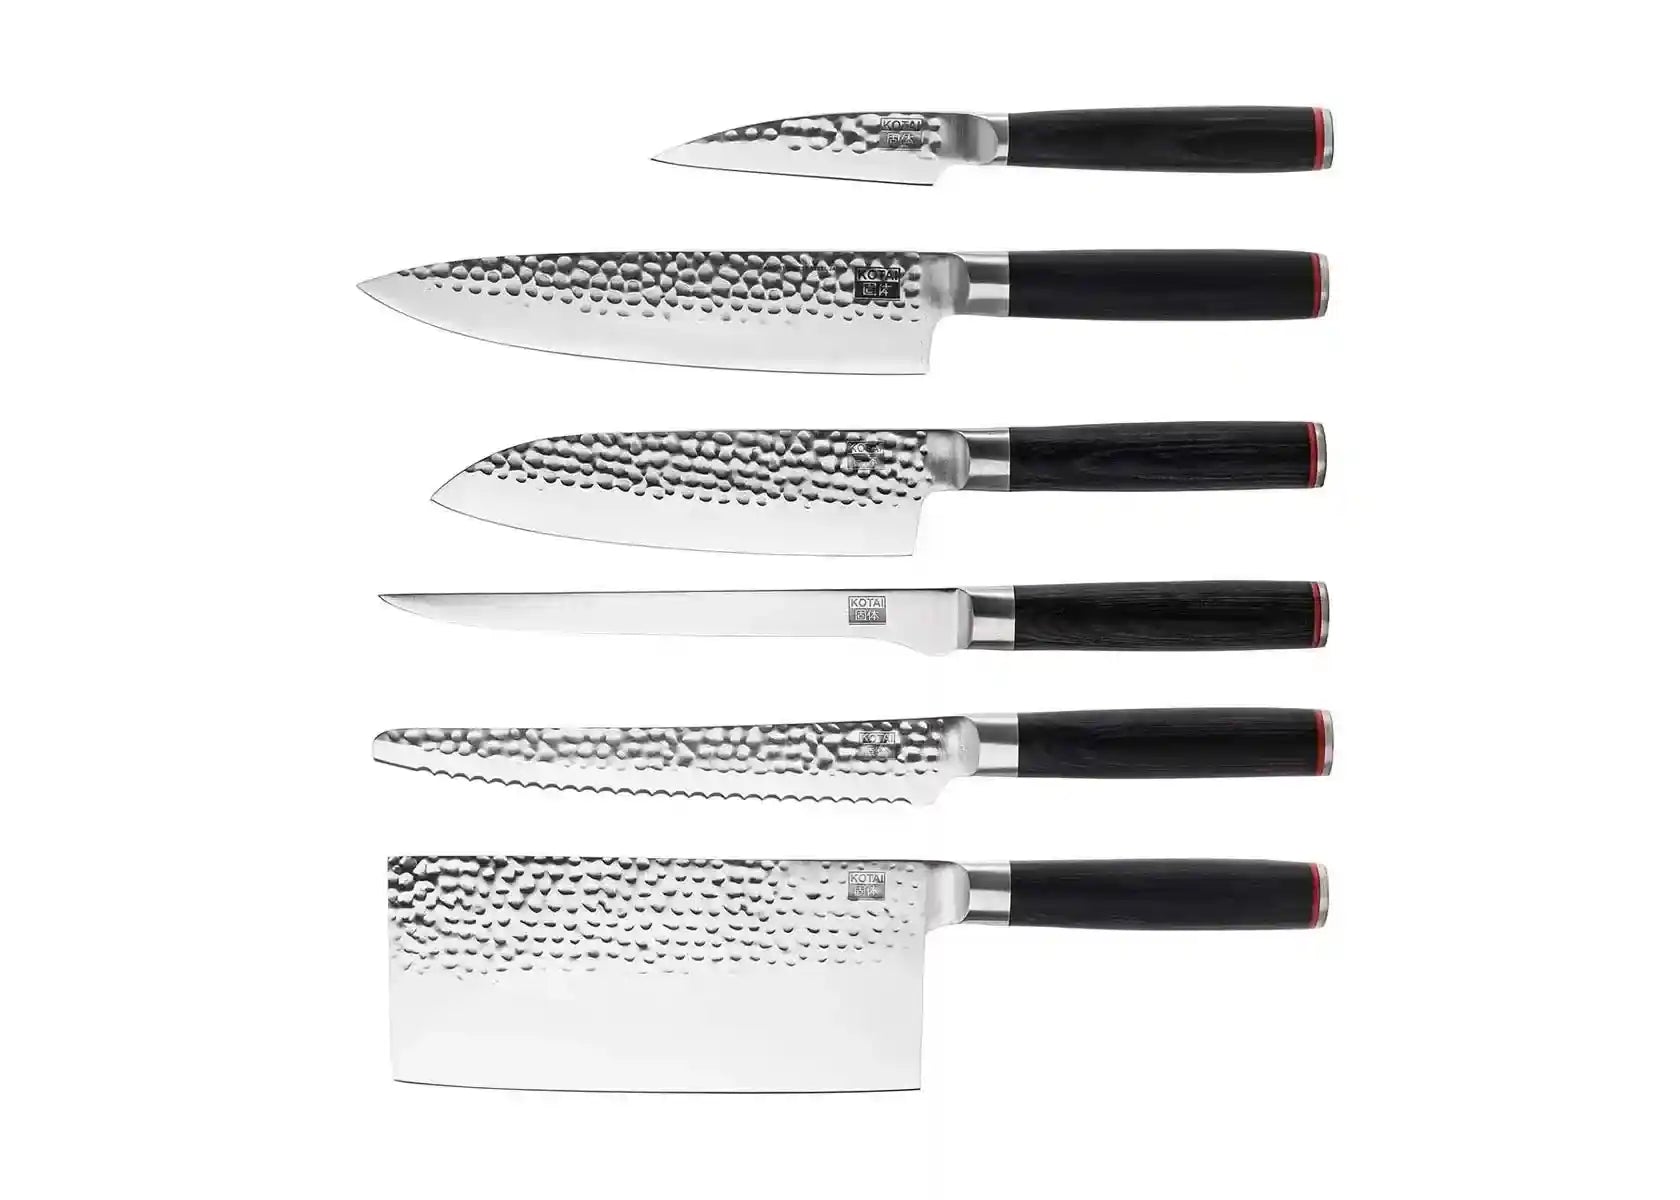  3-Piece Knives Set for Kitchen, Stainless Laser-Etched